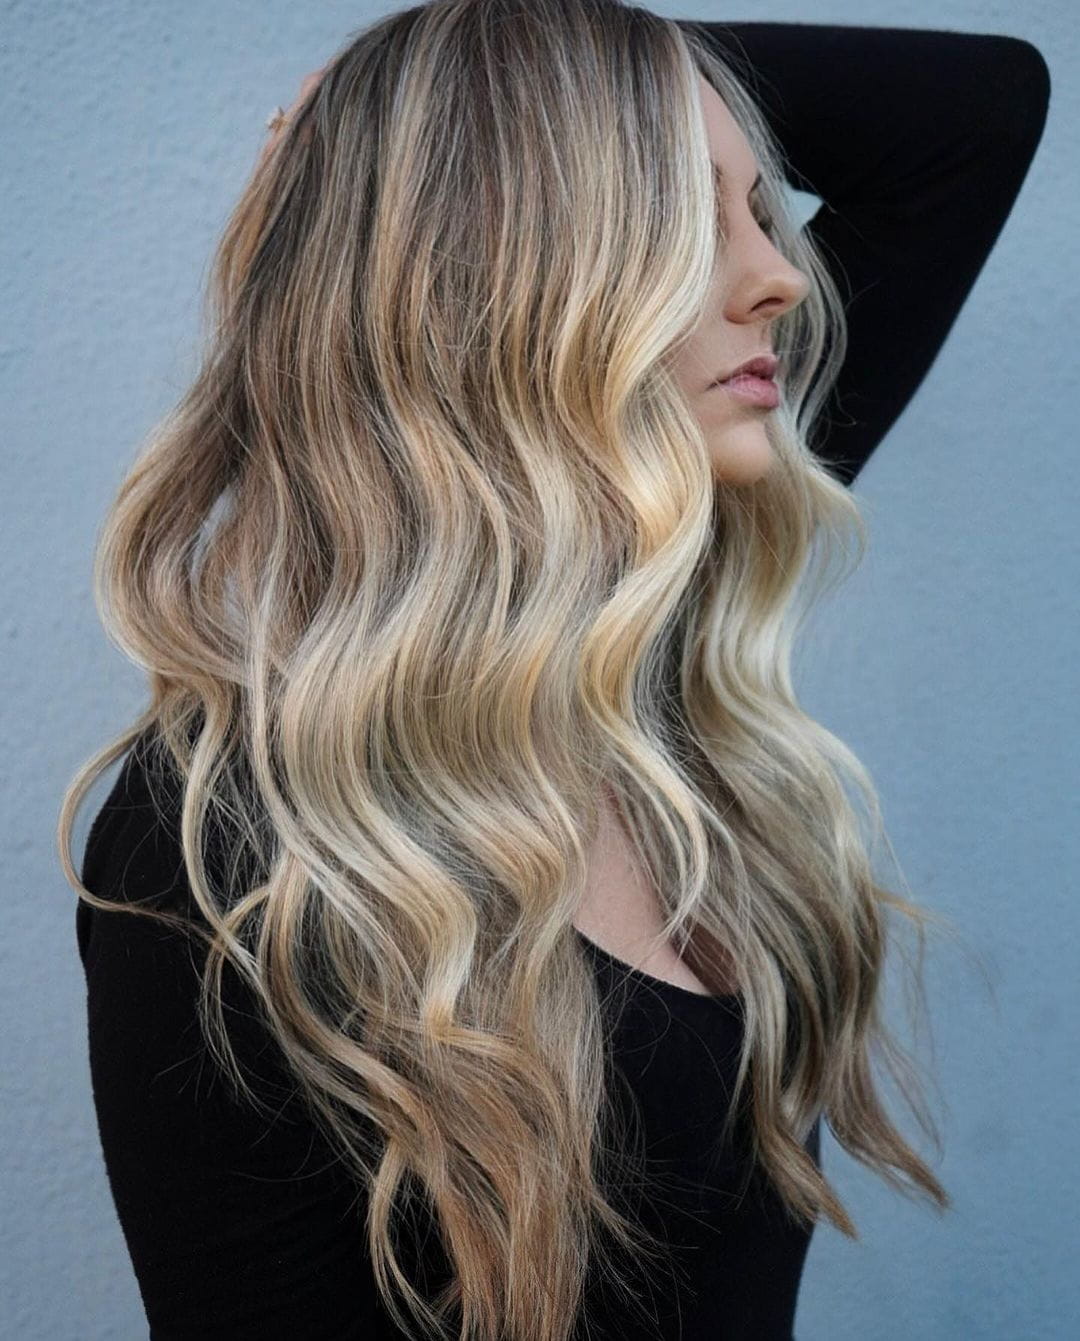 100+ Hairstyle And Hair Colors For Winter That Are Trending images 30